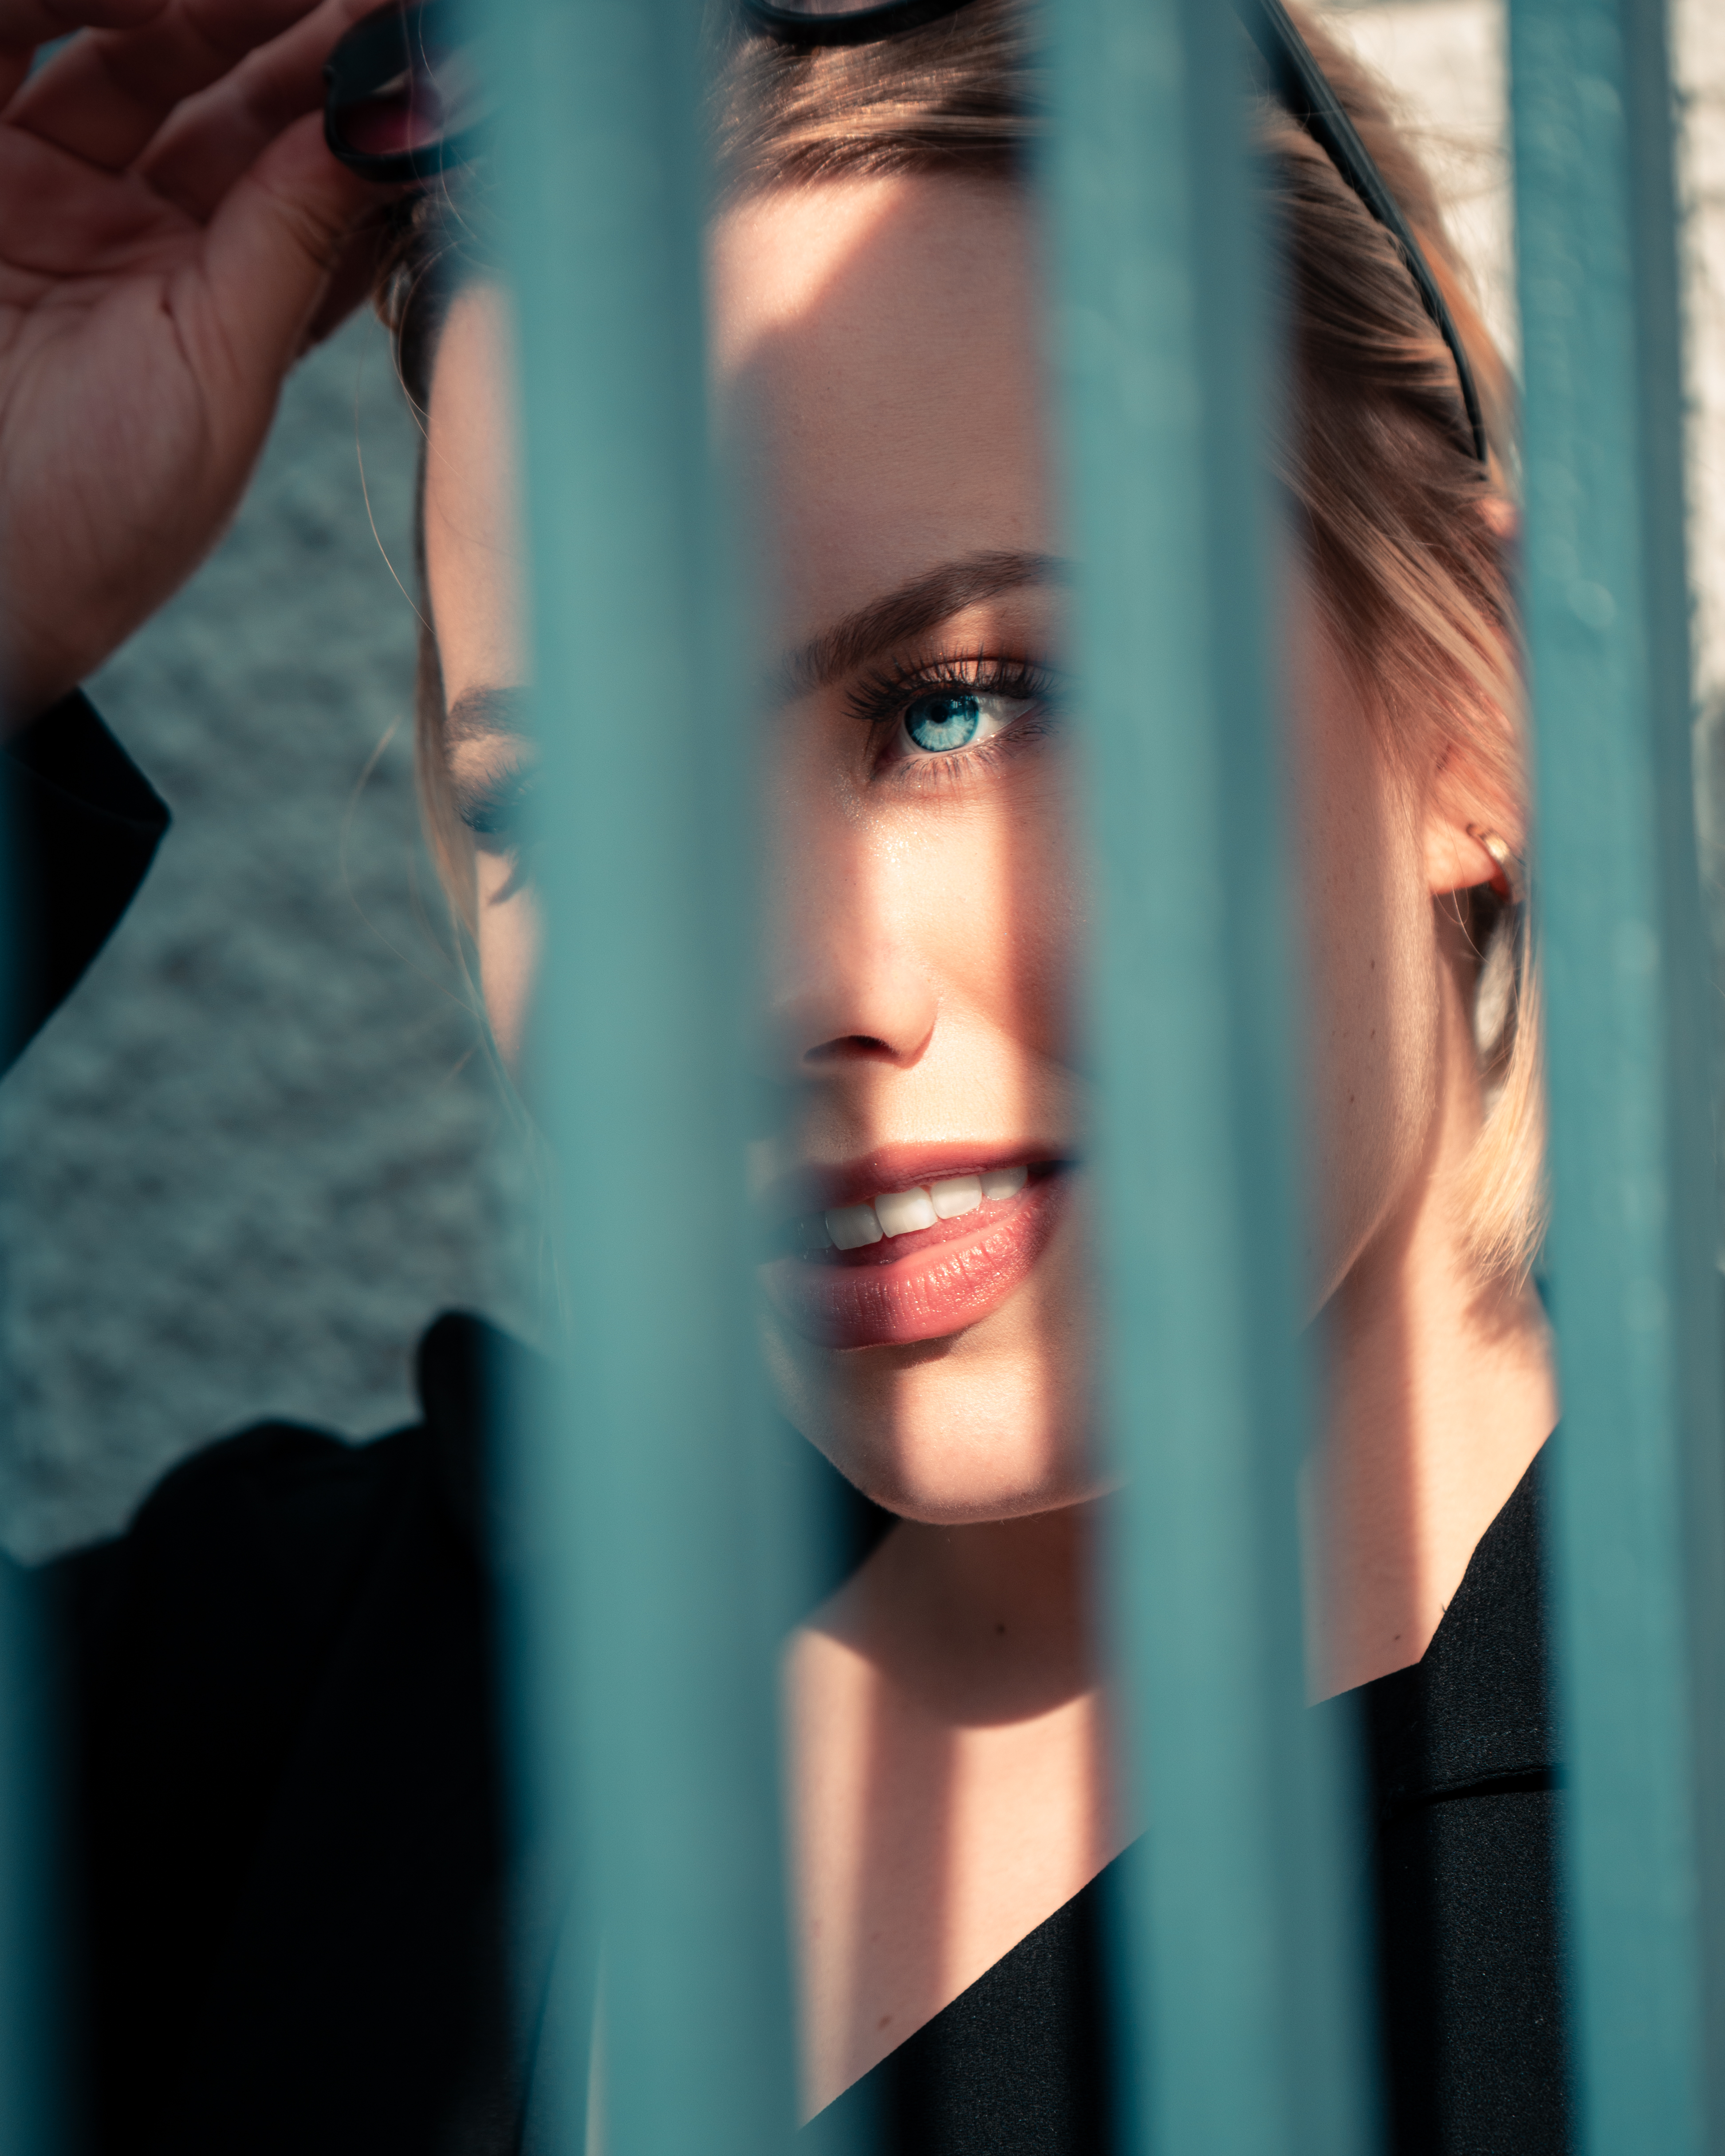 A blonde woman with blue eyes is standing behind bars. Light shines on her face. She is smiling. She has sunglasses on her head and she is holding them with her hand. She is wearing a black coat.